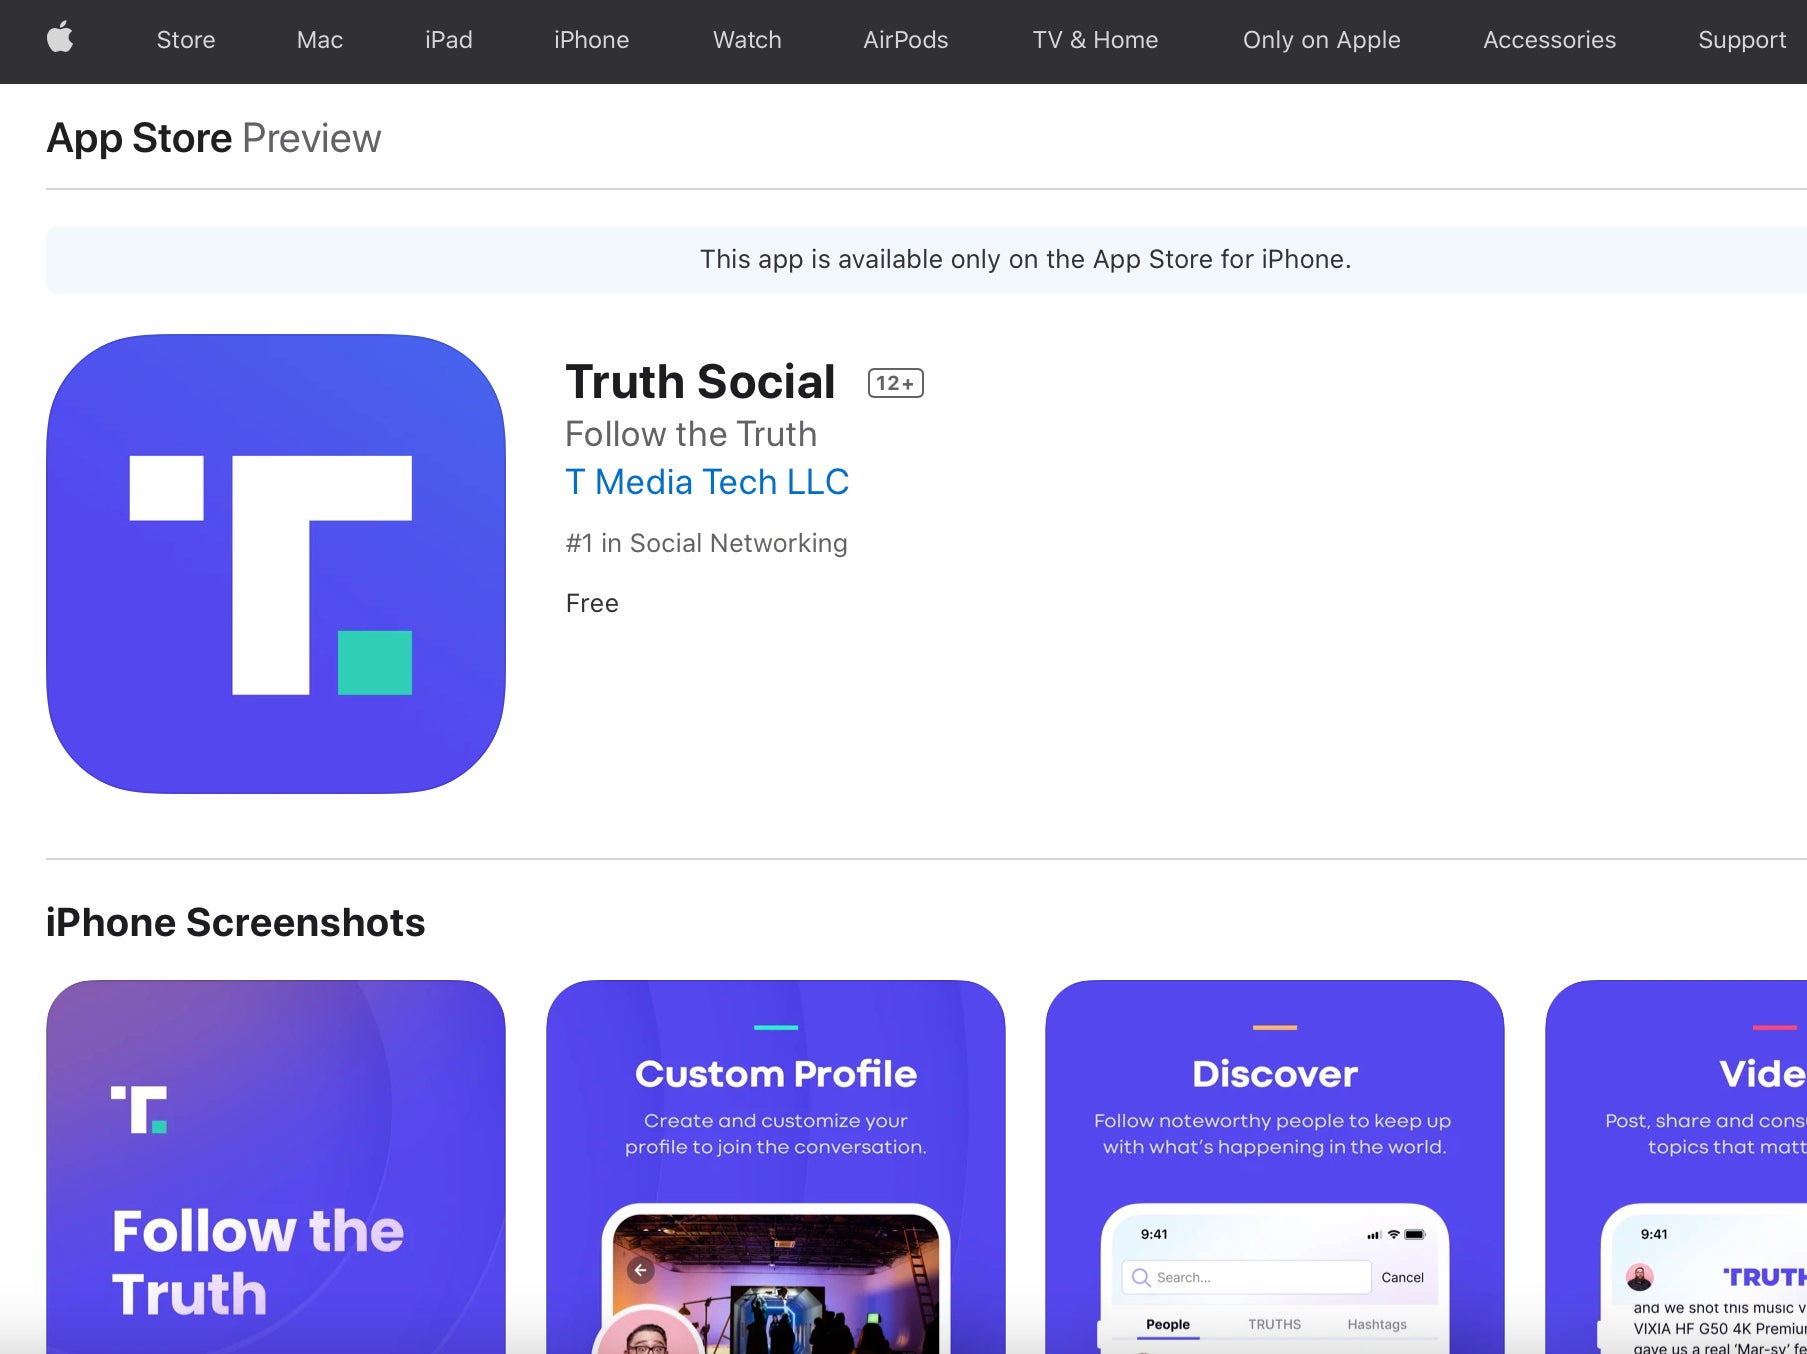 The Truth Social app as it appears on Apple’s App Store